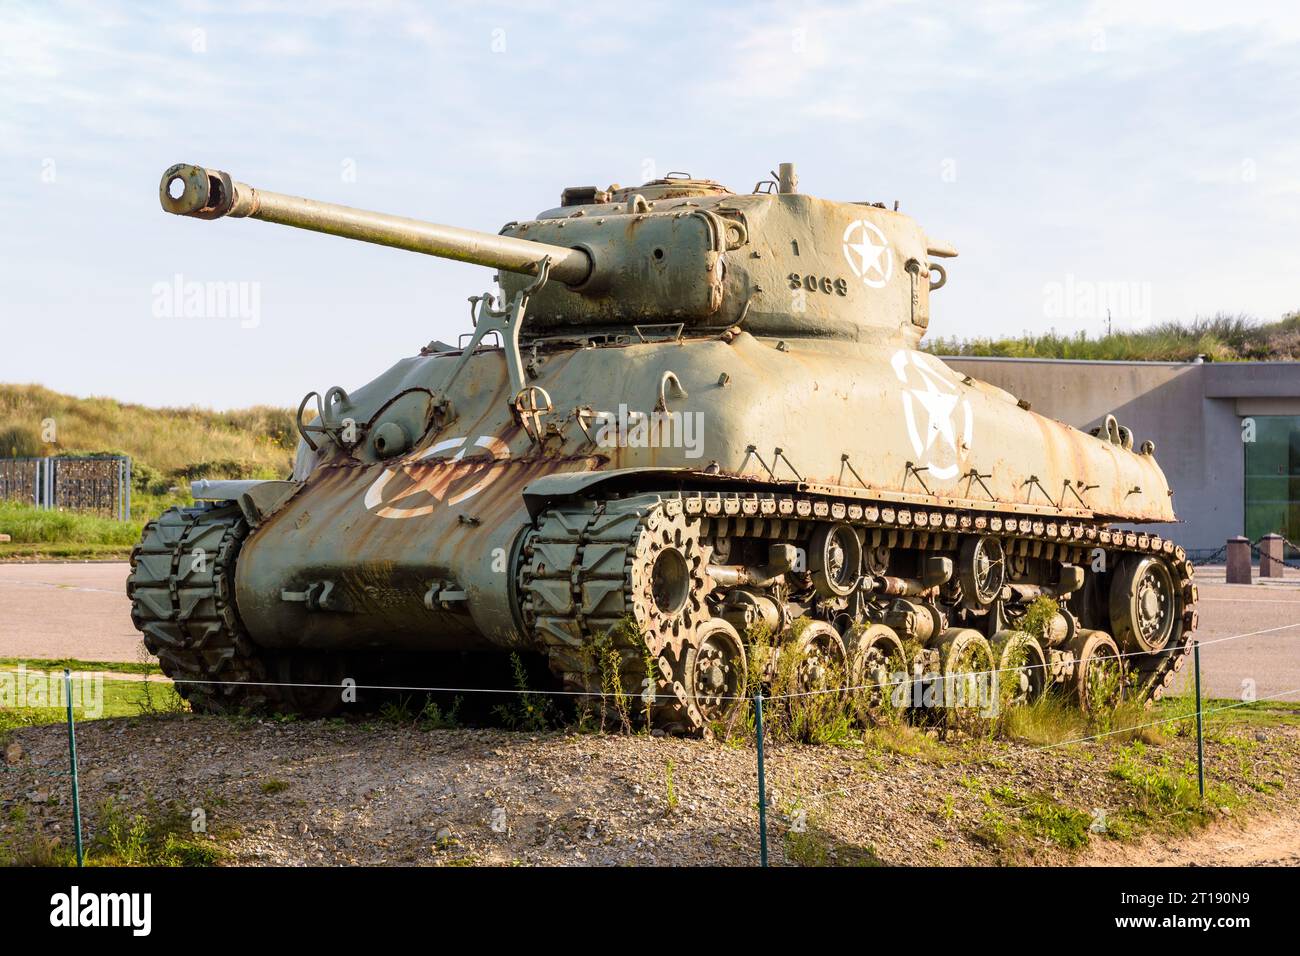 M4 Sherman tank from the US Army exhibited in front of the Utah Beach Landing Museum in Normandy, devoted to D Day and Normandy landings. Stock Photo